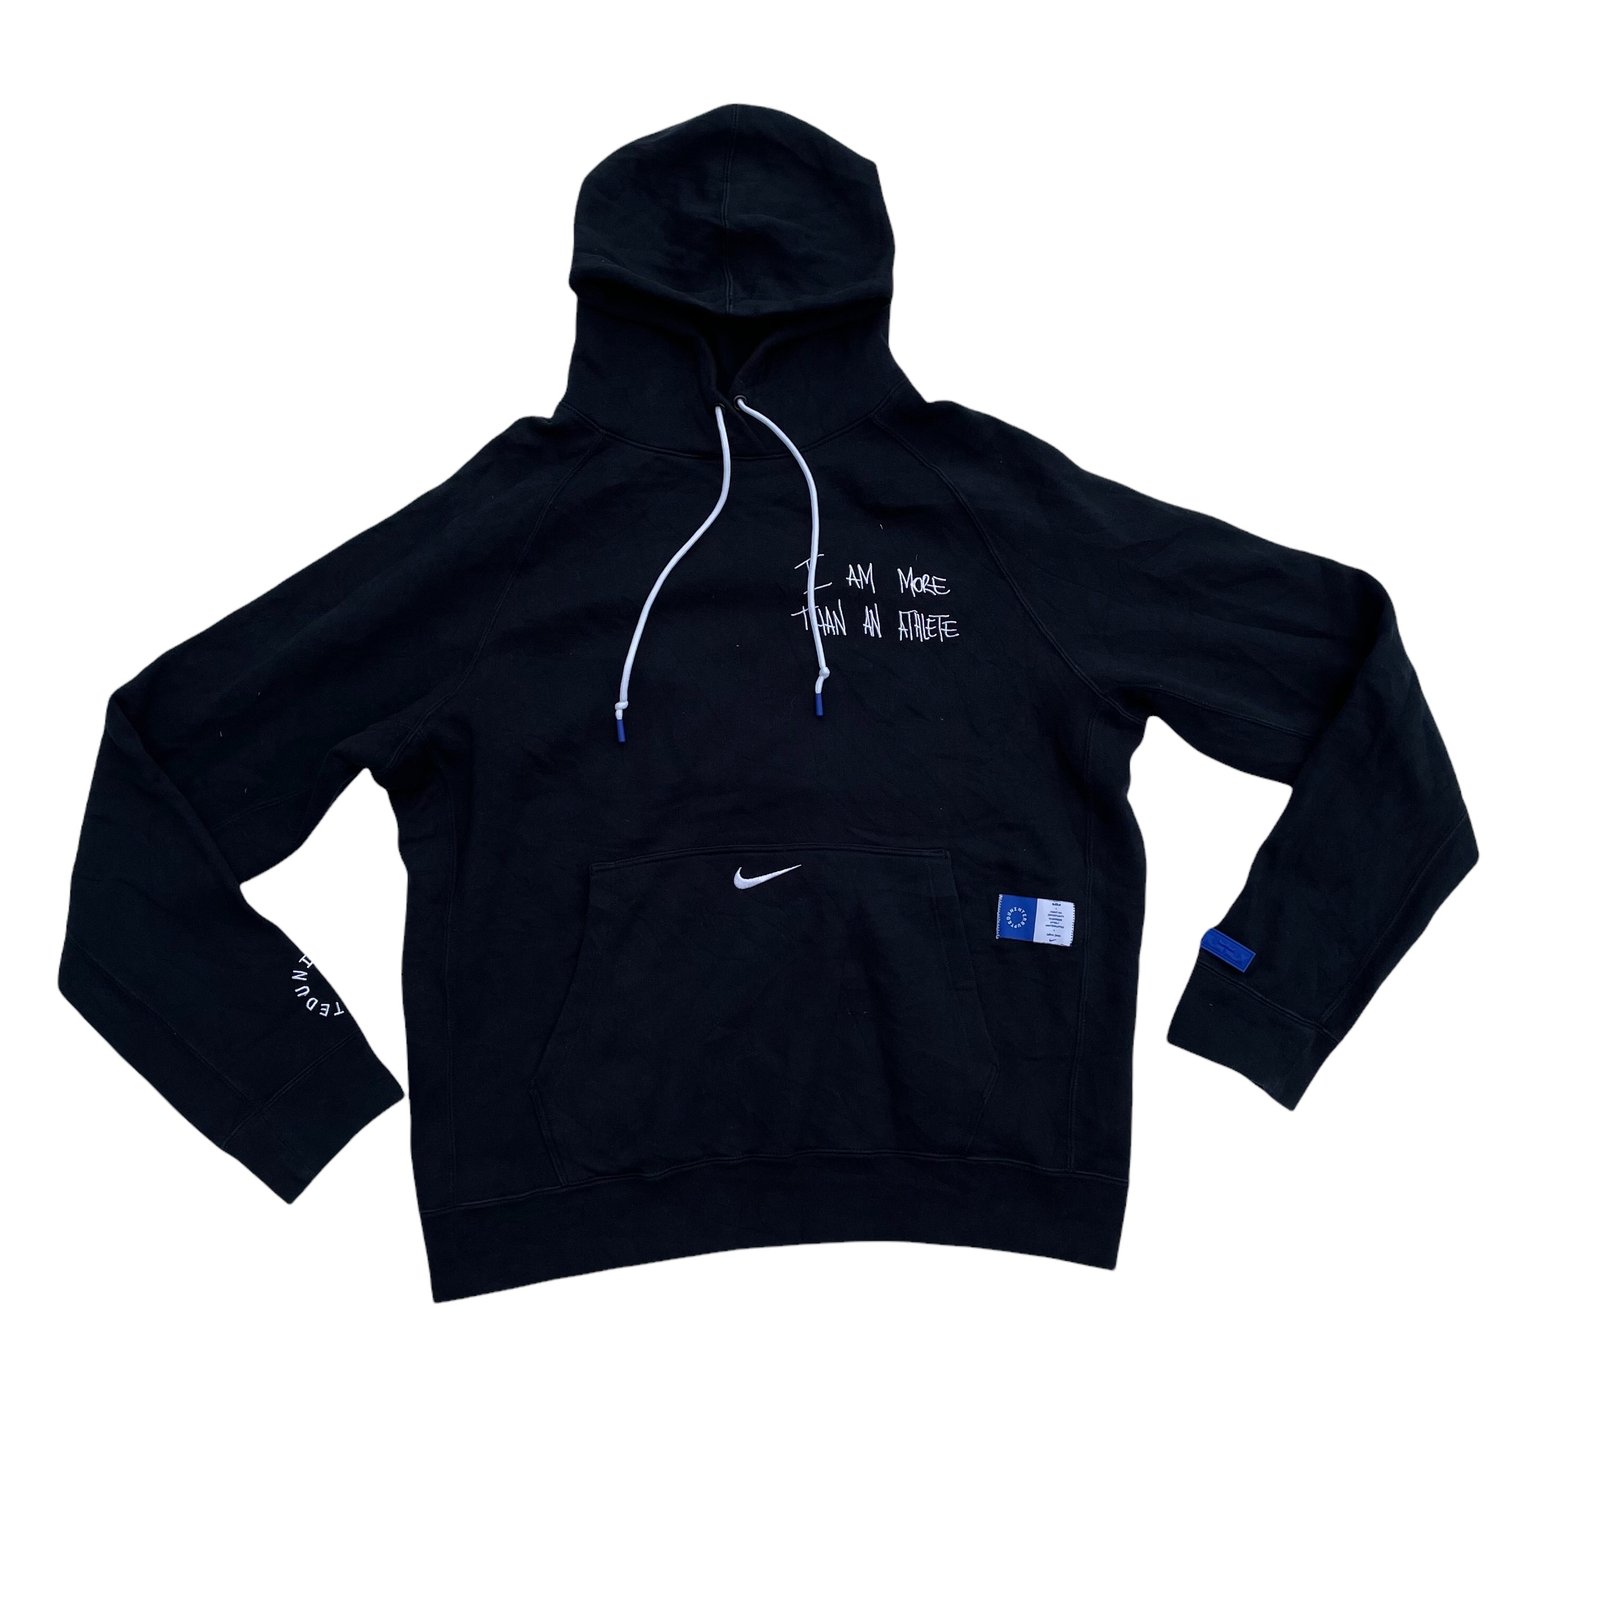 Nike×UNINTERRUPTED Pullover Black size Lgym